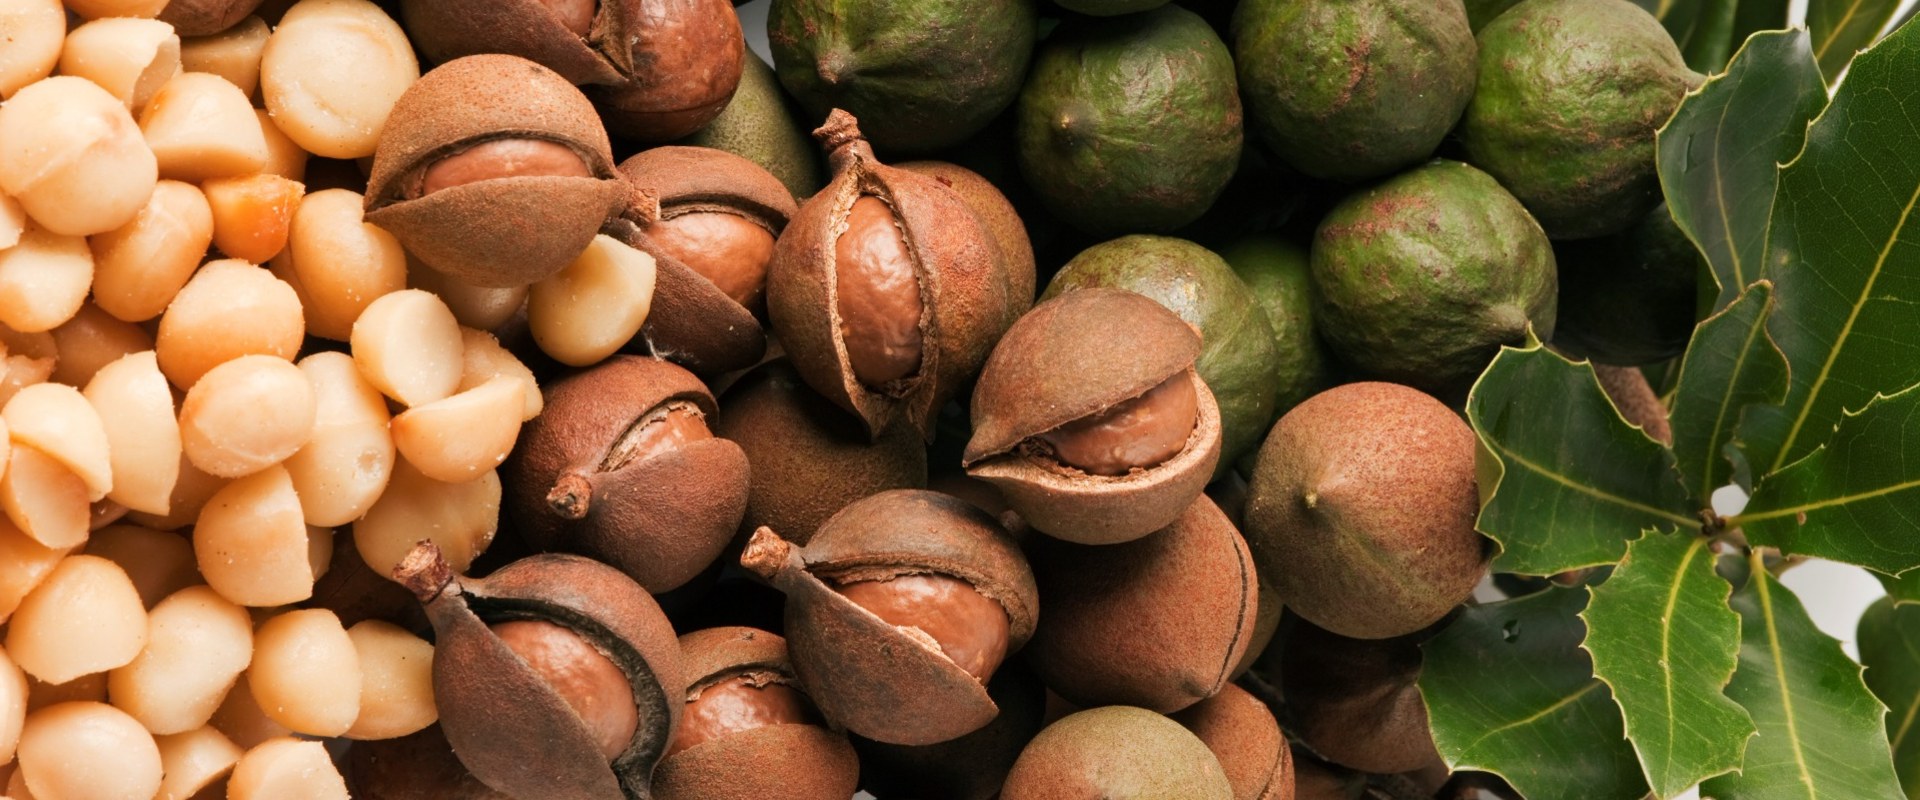 Can you eat macadamia nuts straight from the tree?